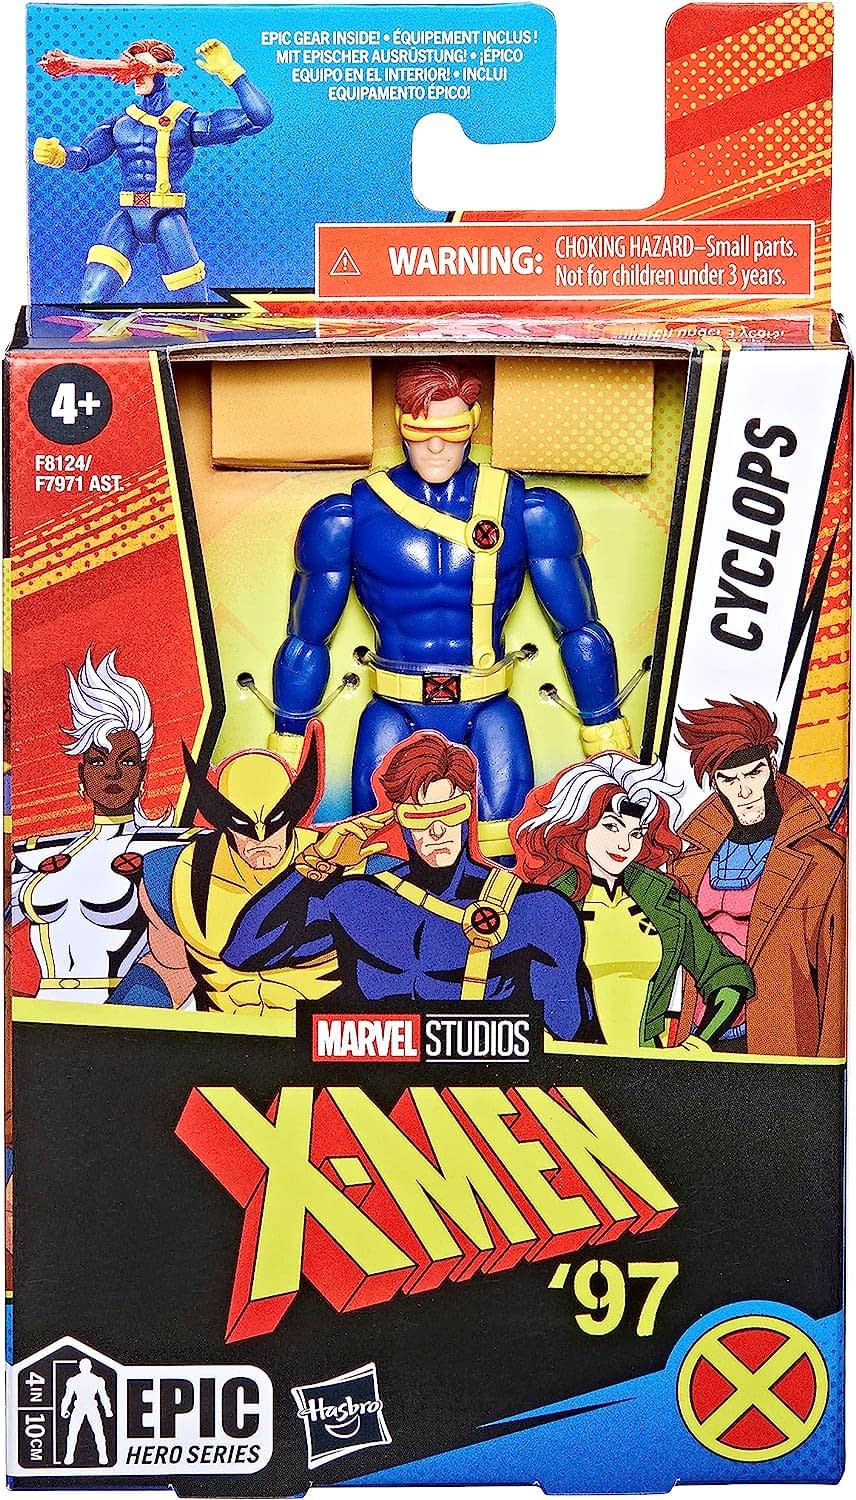 Hasbro Unveils New Collectibles for XMen 97’ with Epic Hero Series